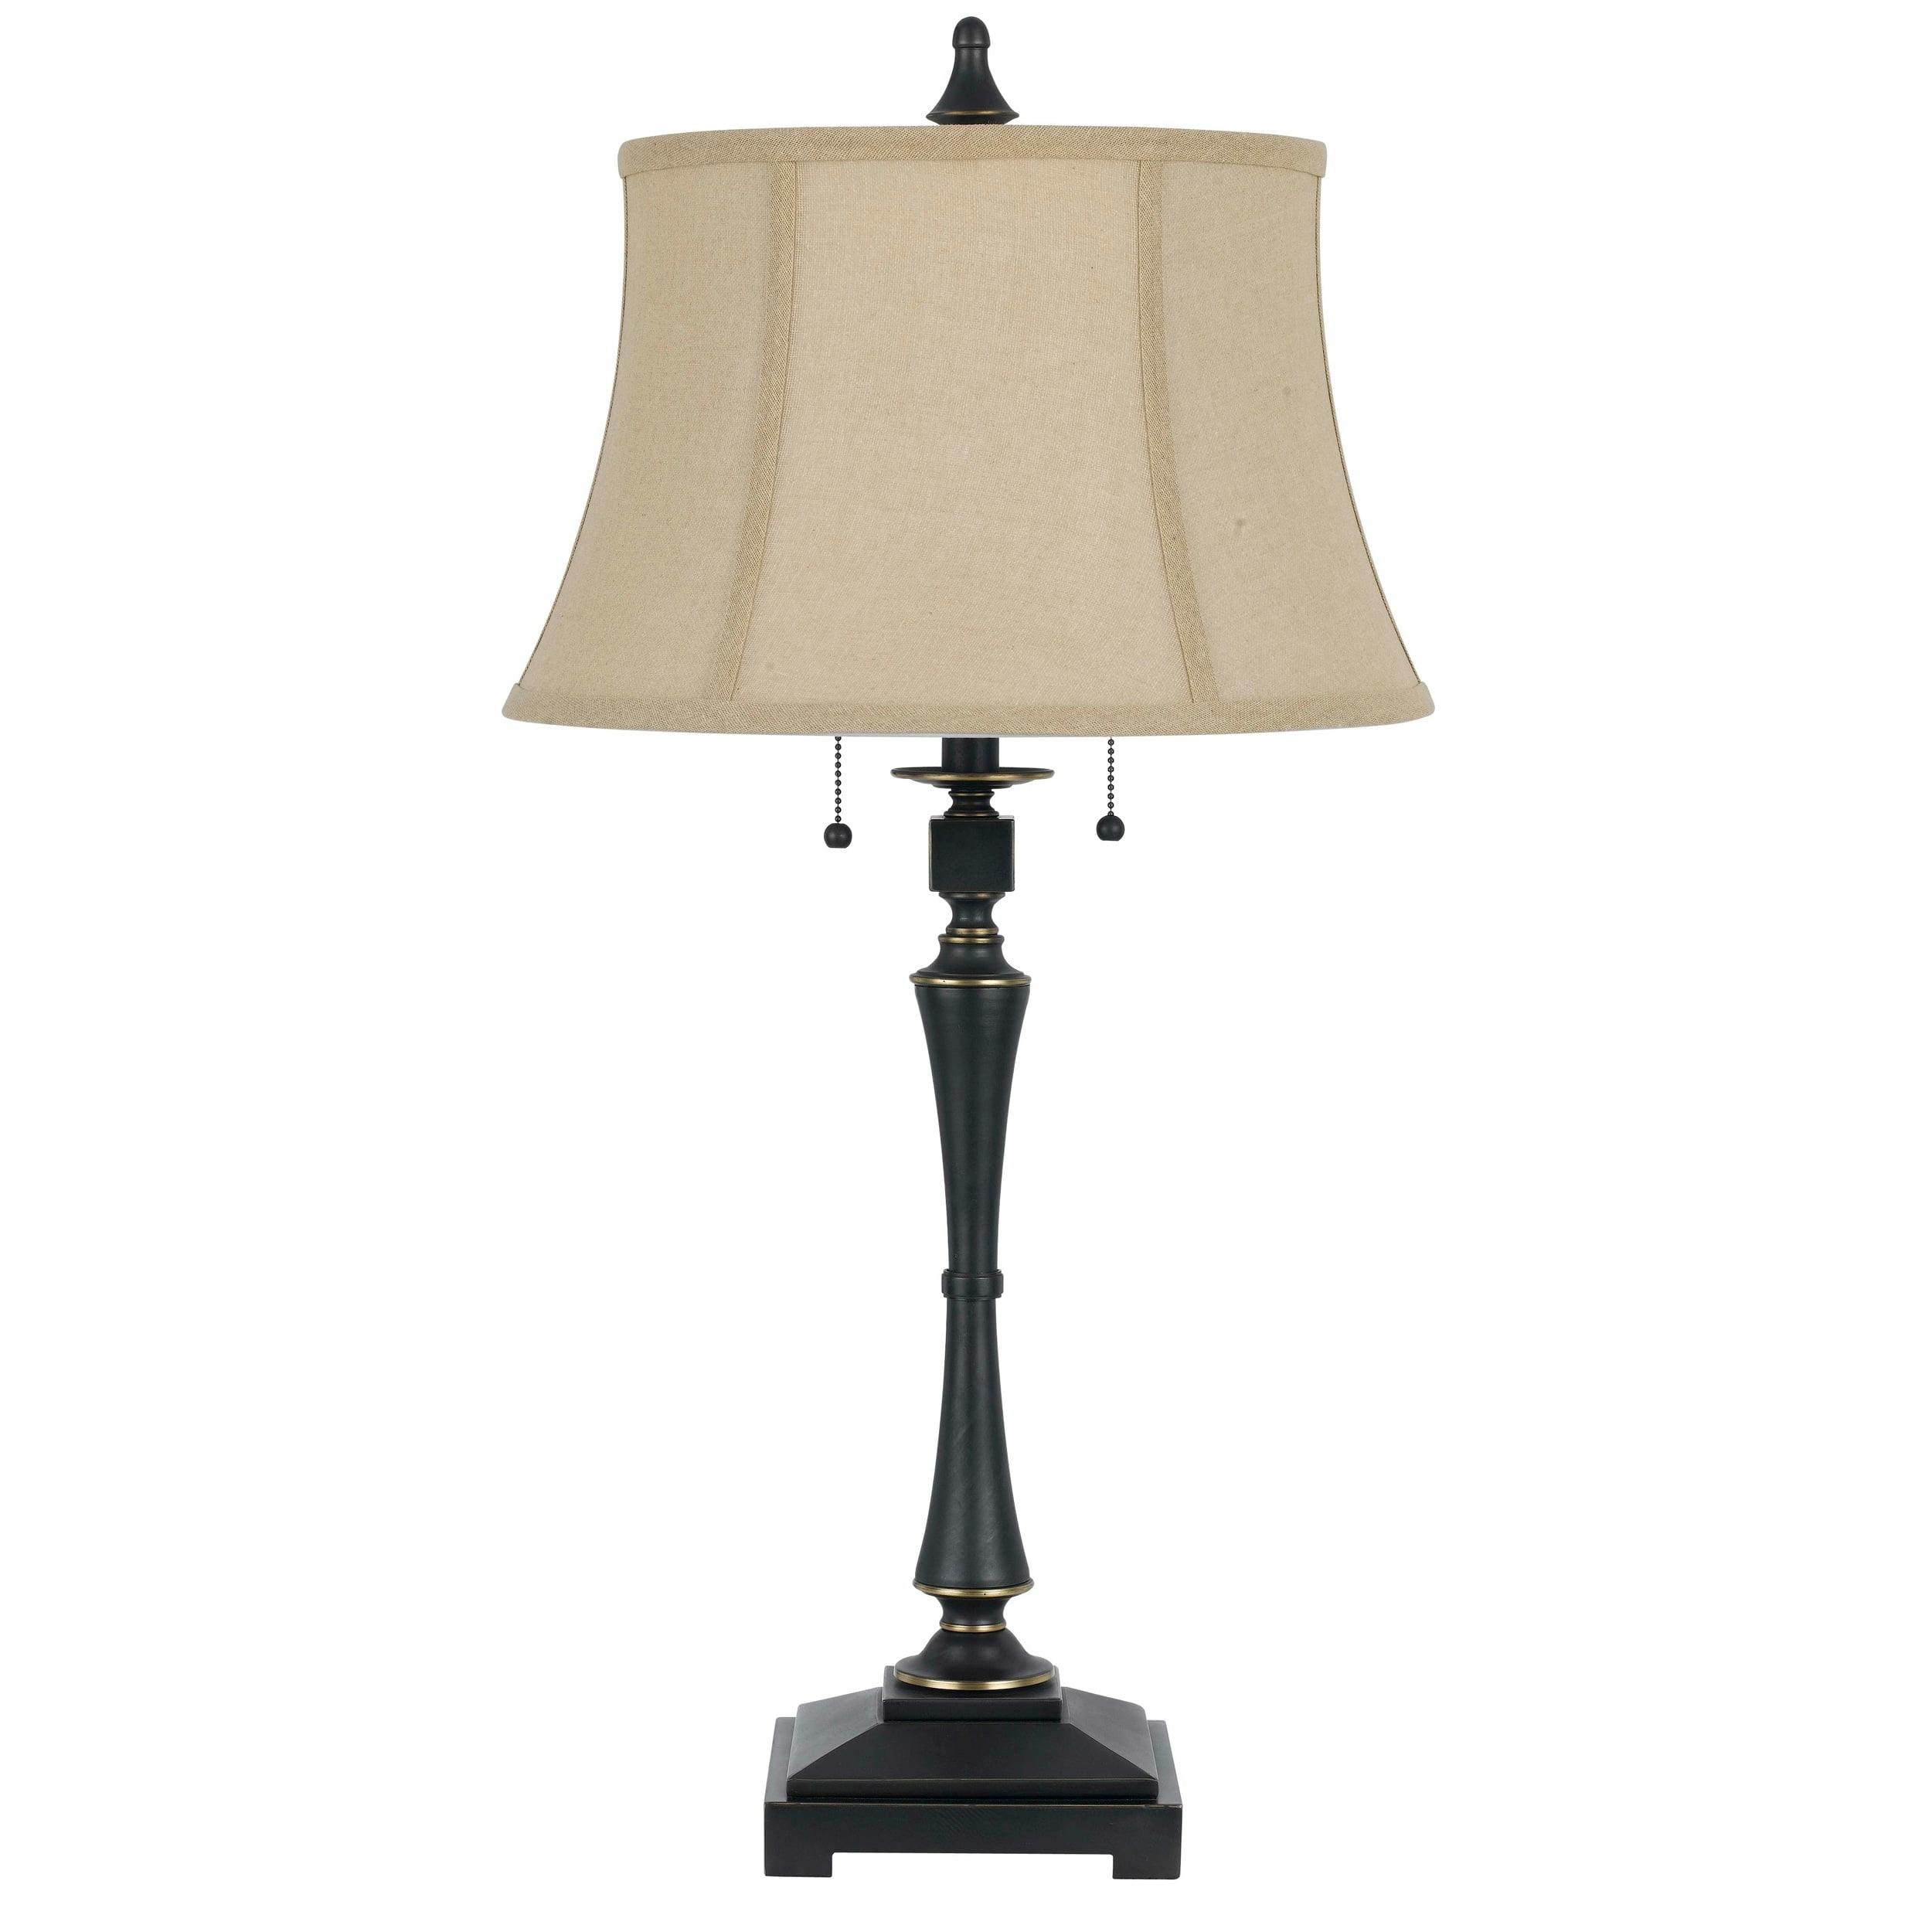 Sophisticated Black Metal Table Lamp with Beige Fabric Shade